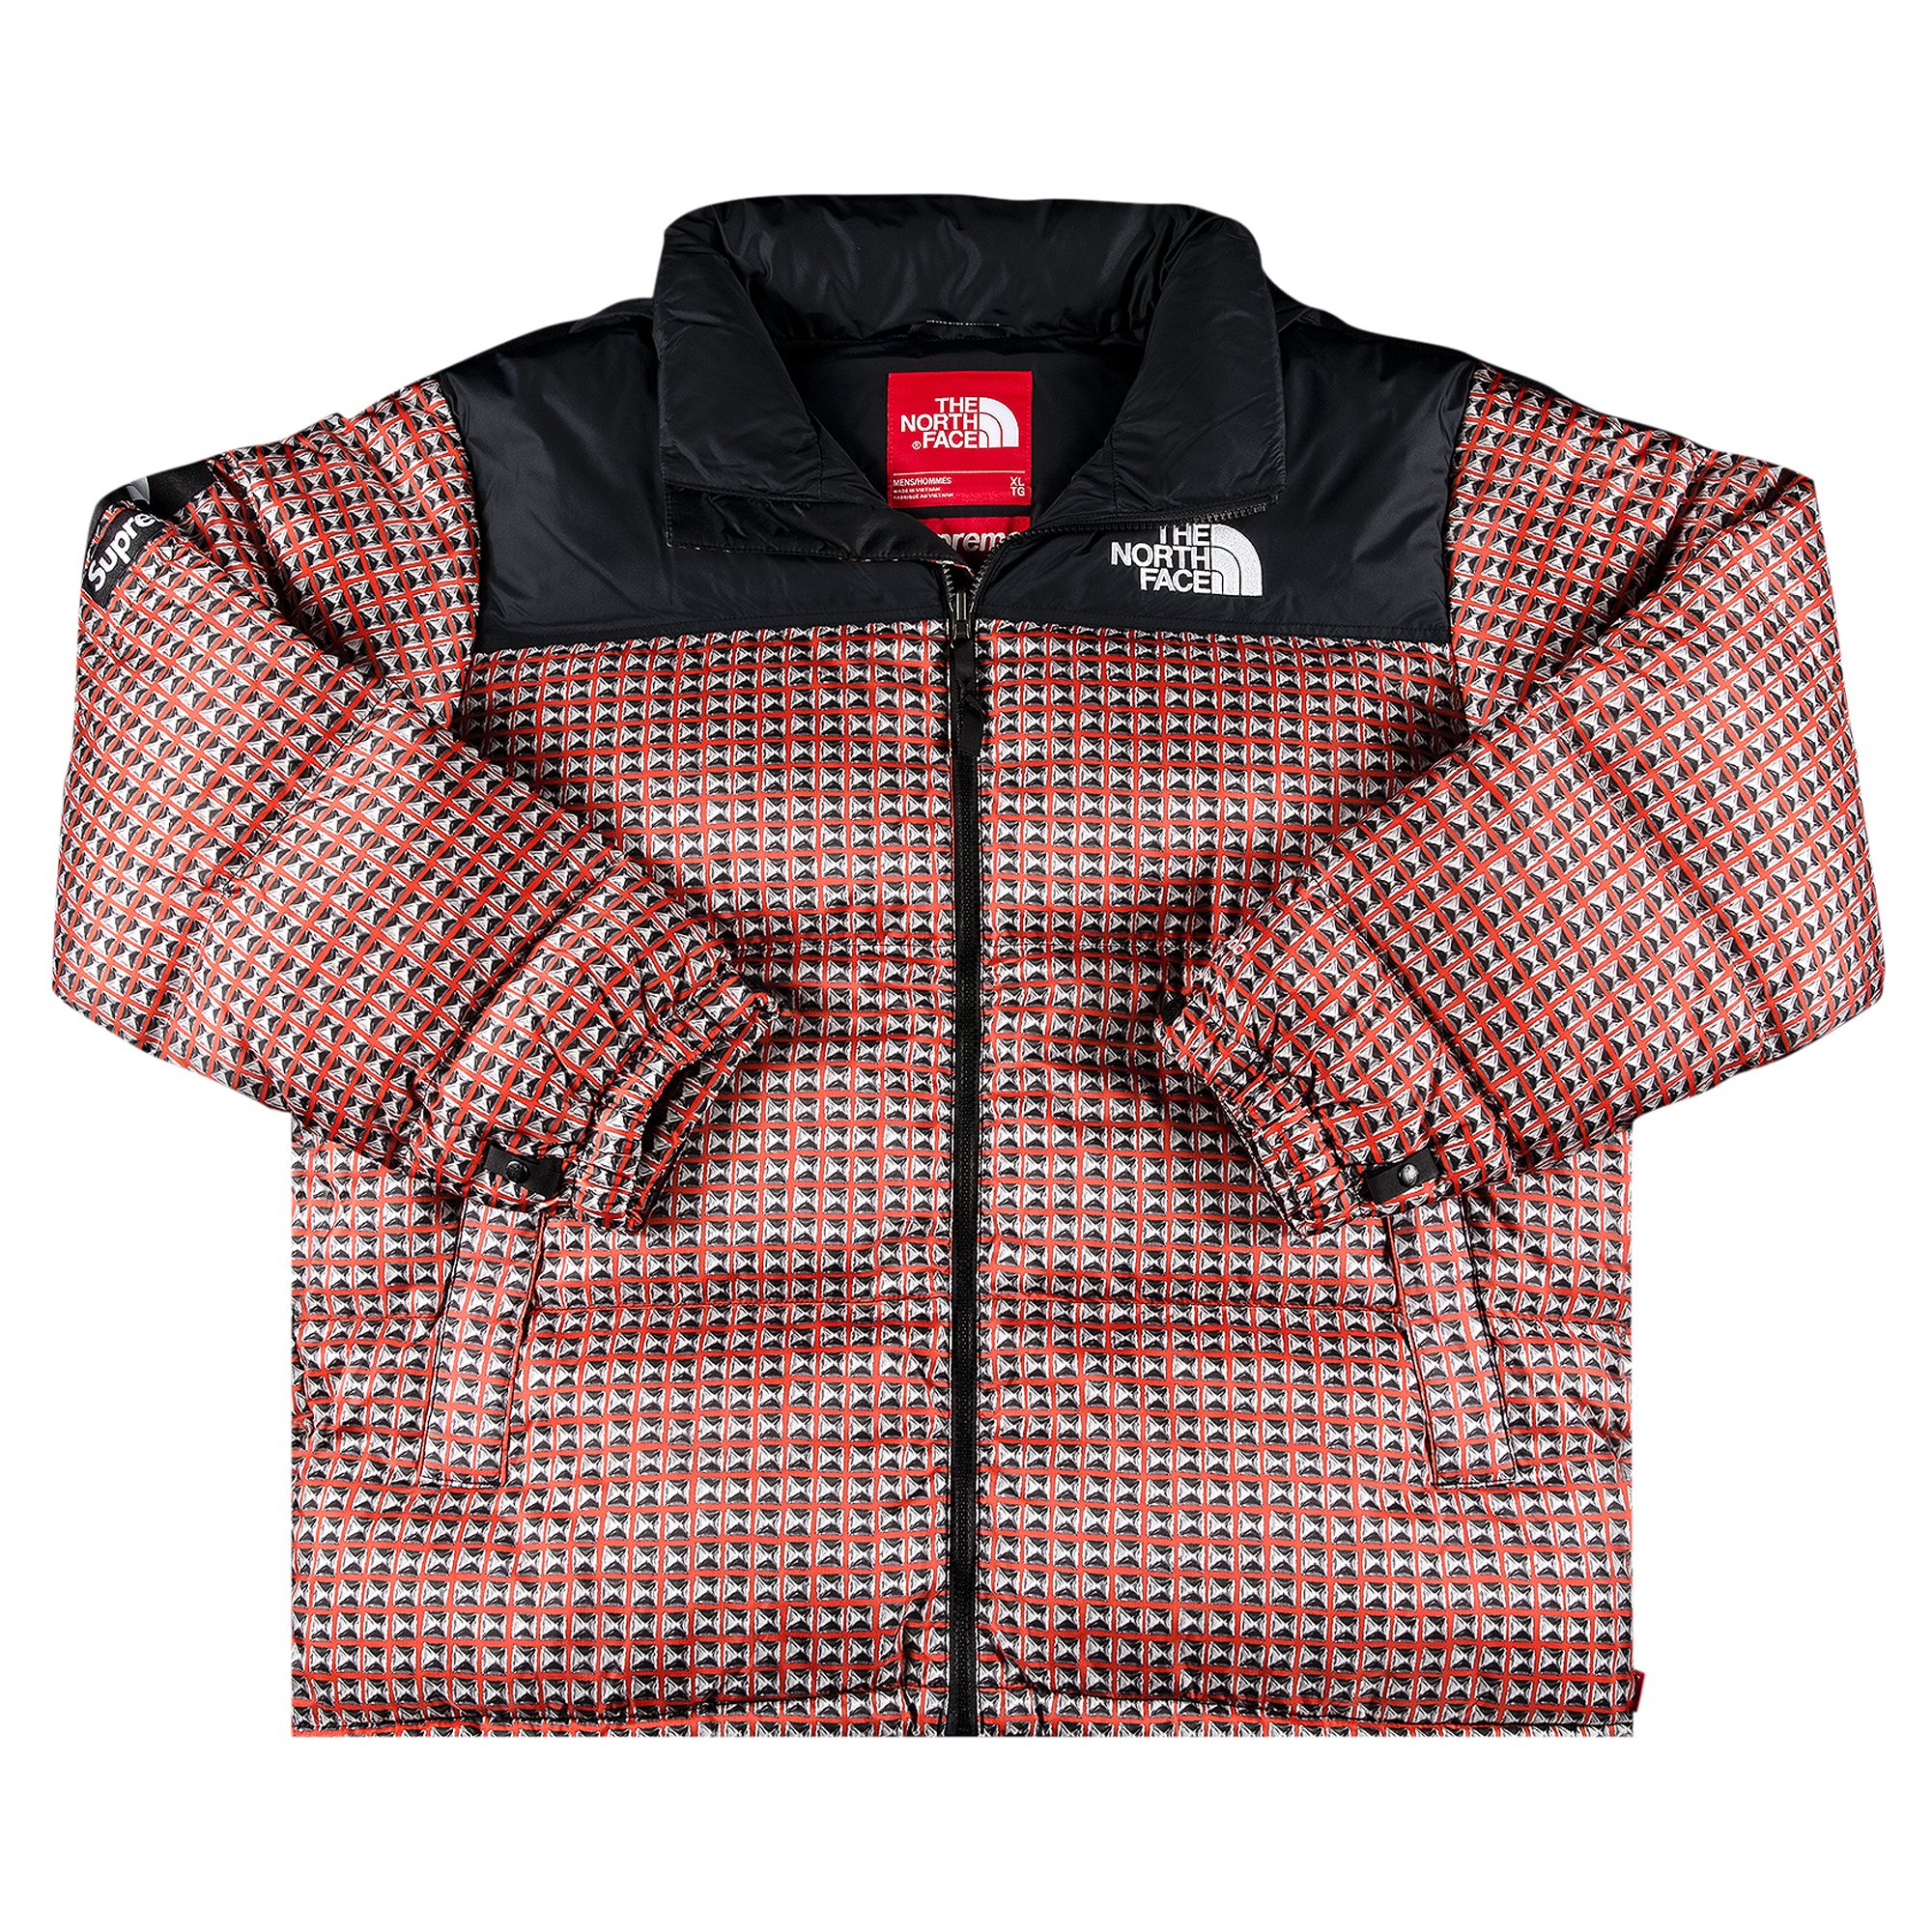 Buy Supreme x The North Face Studded Nuptse Jacket 'Red' - SS21J6 